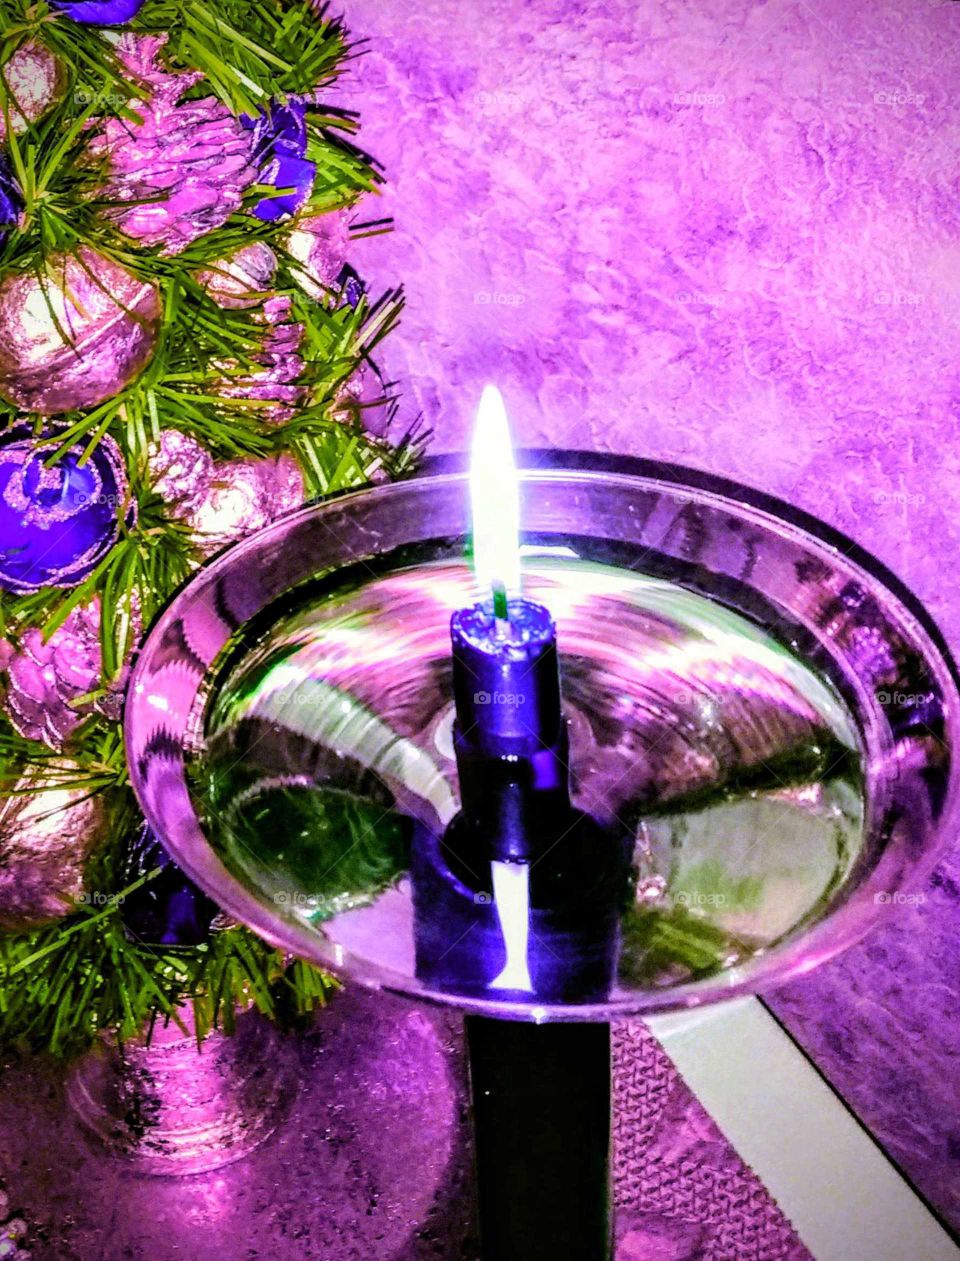 A purple Christmas candle with purple ornaments and background